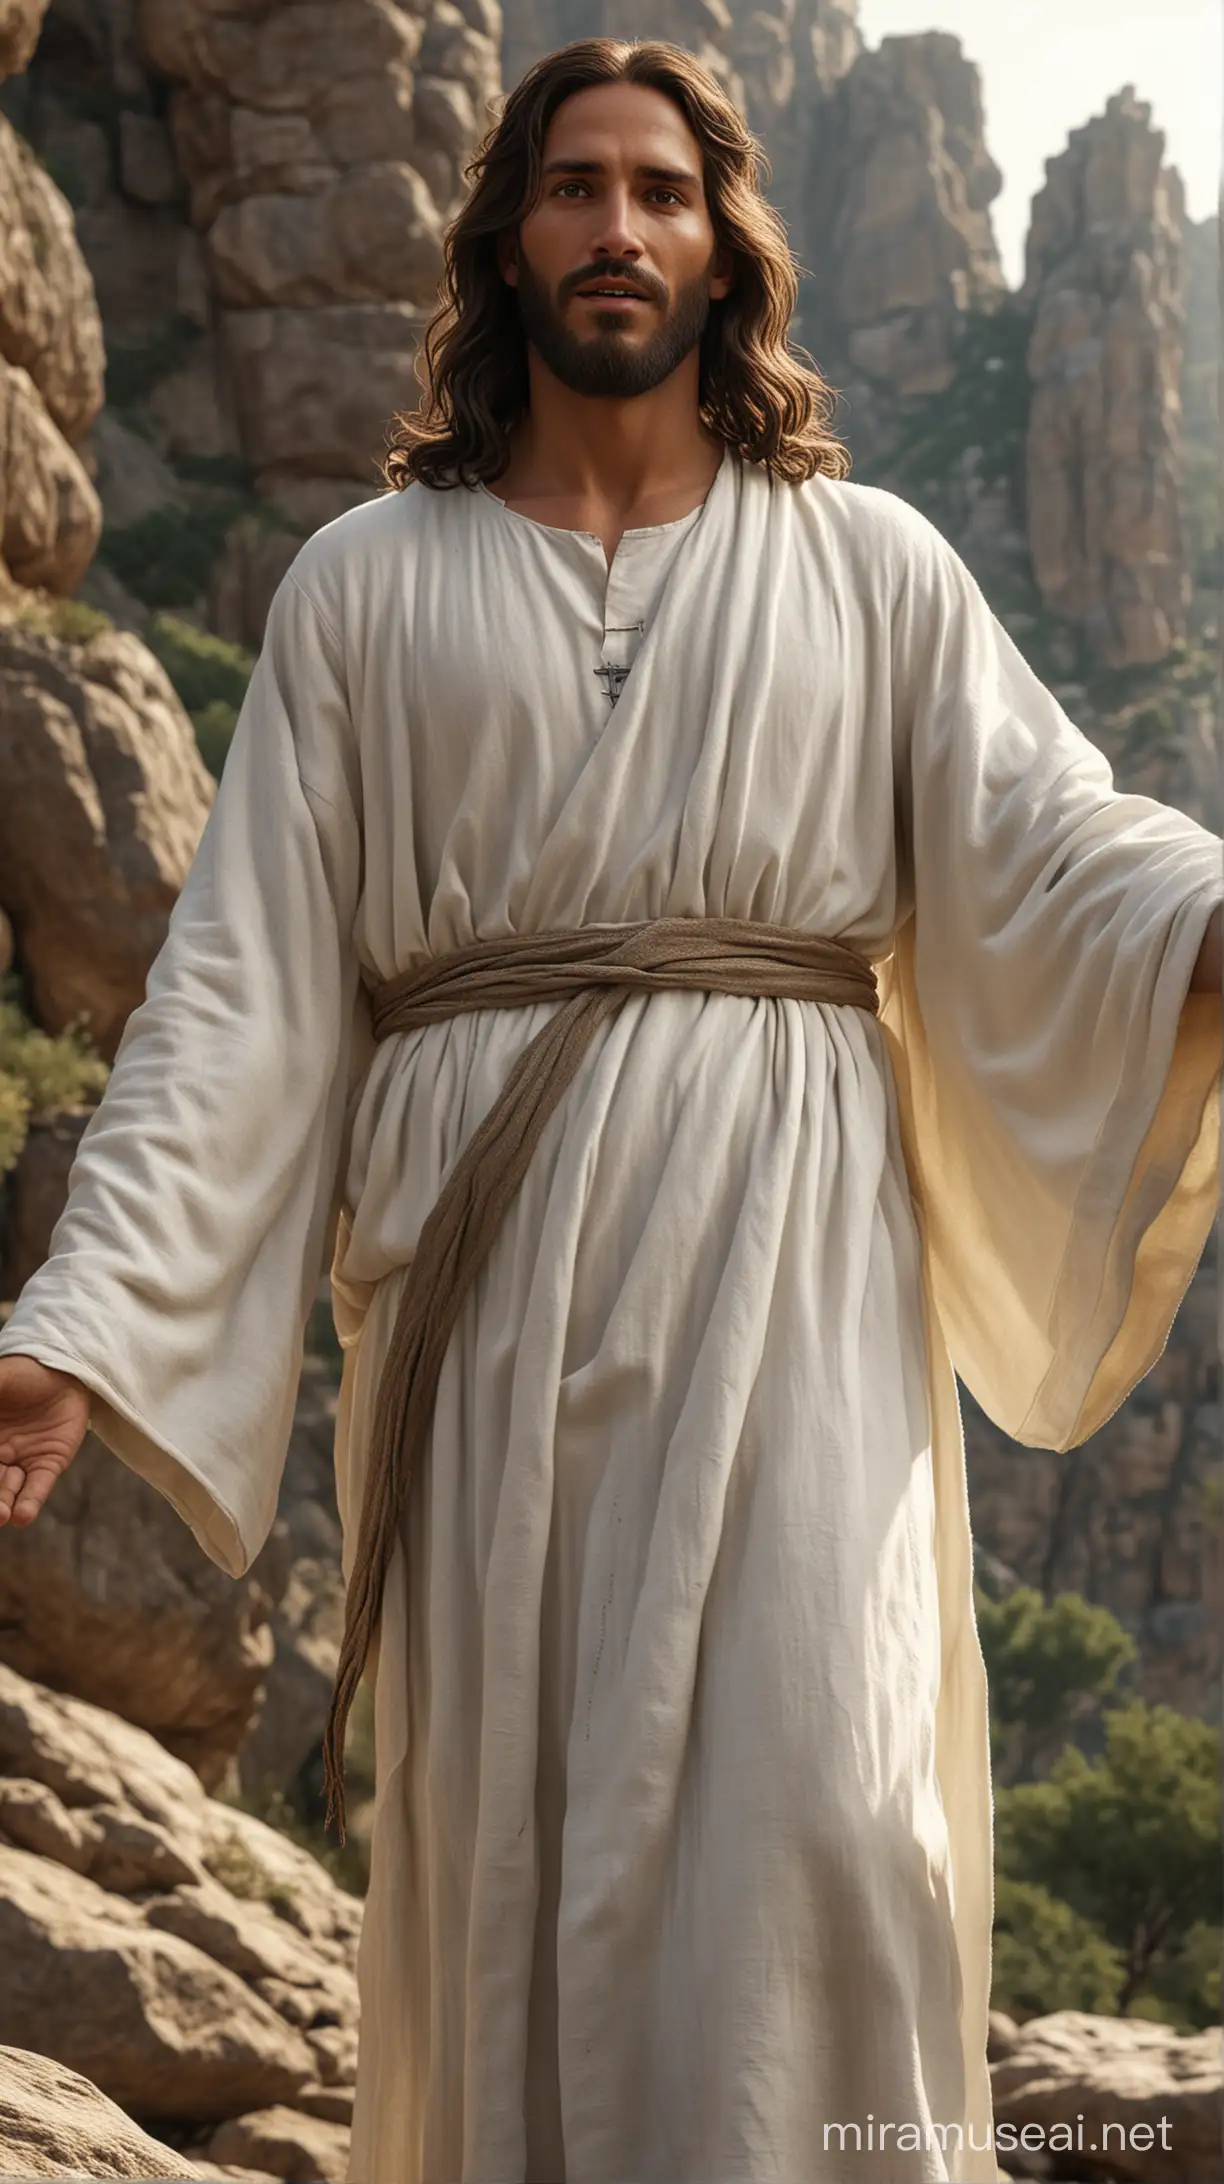 ULTRA REALISM PHOTOREALISTIC Generate a hyper-realistic image of Jesus with more dark olive toned tanned skin, thick hair, strong ancient jewish features, wearing pure white jewish Holy Tunic, standing on a high rock, warm welcoming smile, open arms, highly visible round piercing marks in wrists, looking into the camera